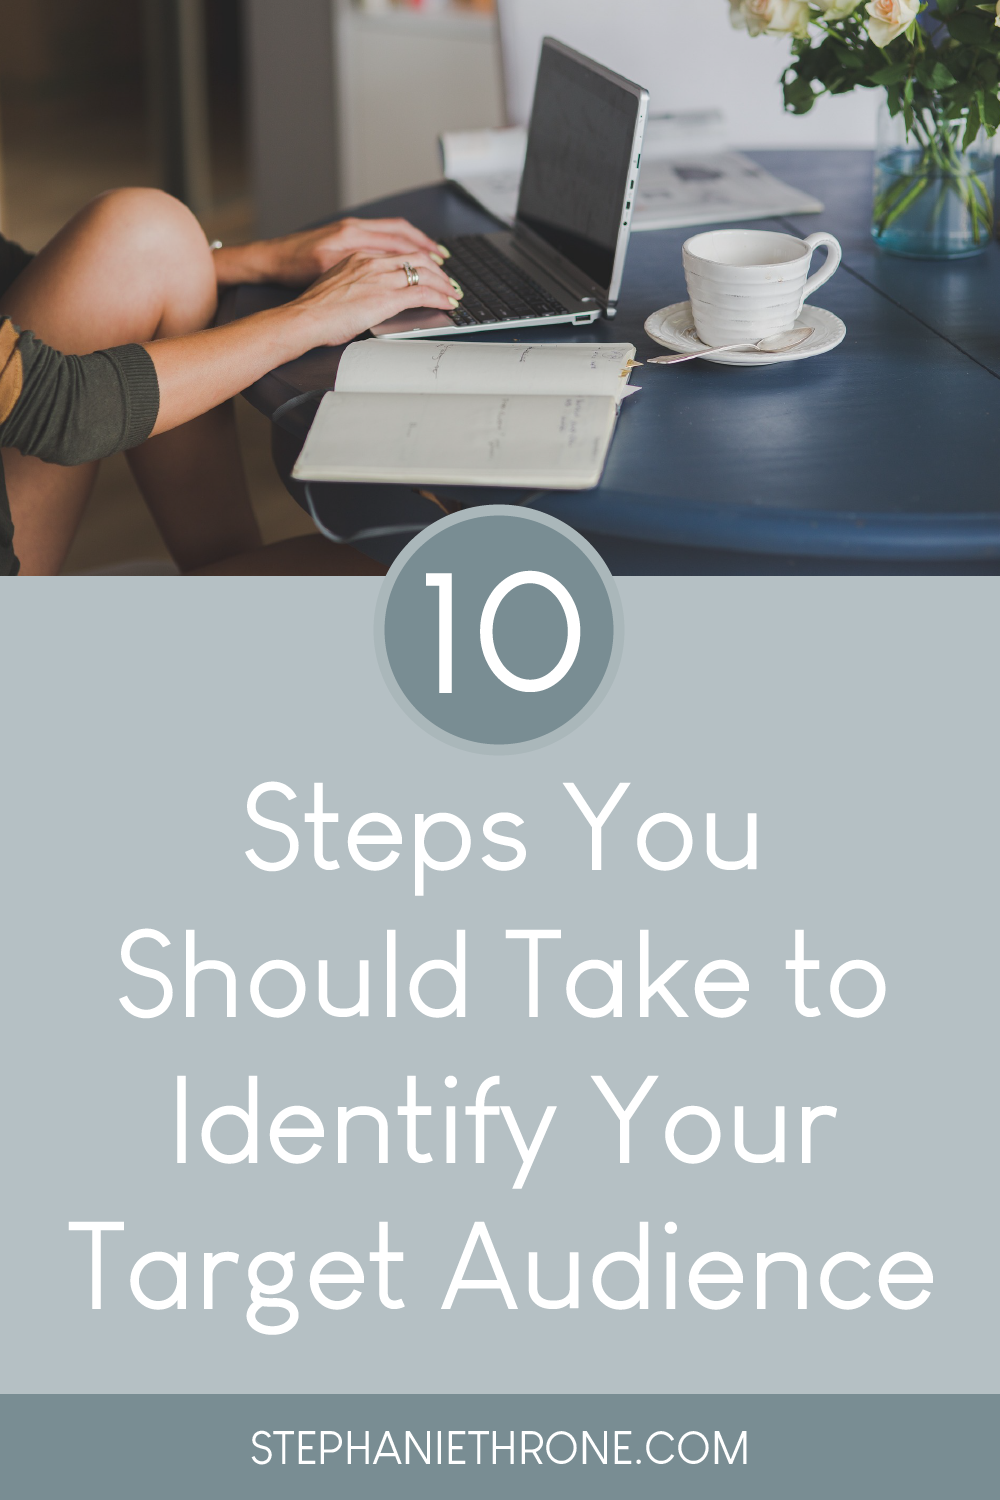 10 Steps You Should Take to Identify Your Target Audience